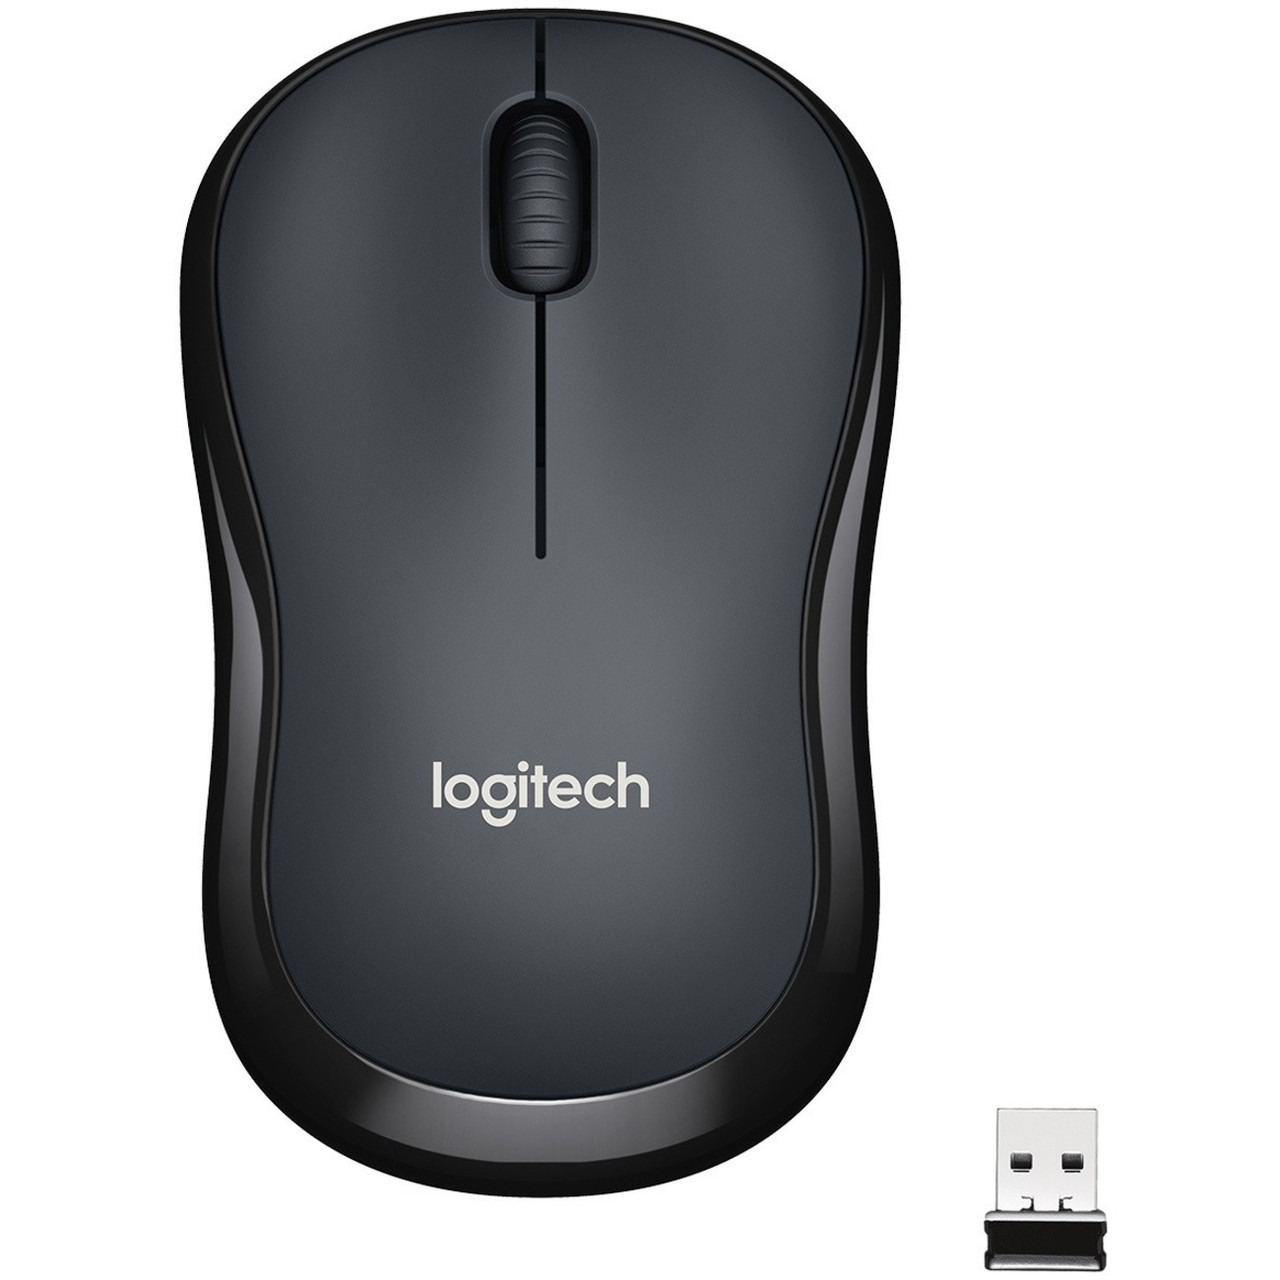 Logitech M220 SILENT Wireless Mouse, 2.4 GHz USB Receiver, 1000 DPI Optical Tracking, Battery, Ambidextrous, Compatible with PC, Mac, Laptop -